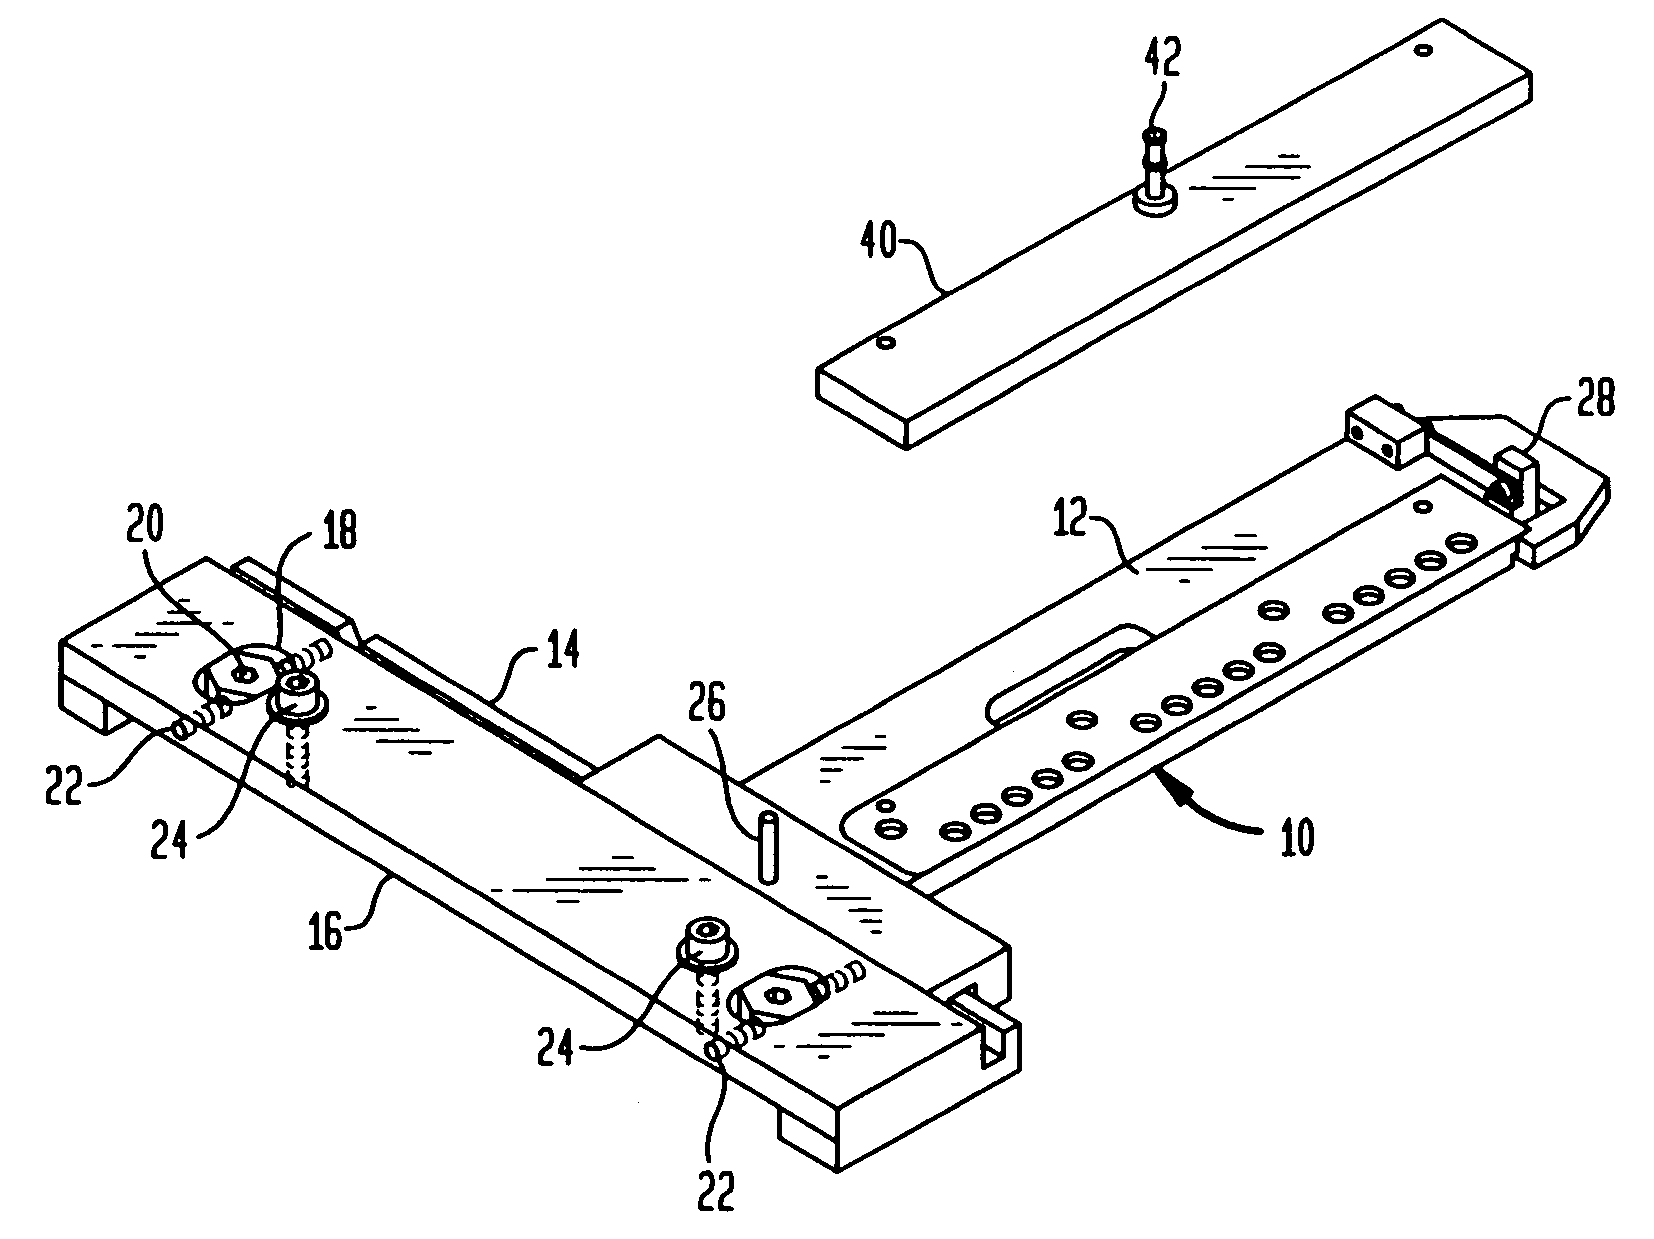 Mask for depositing and distributing reagents on an analytical support